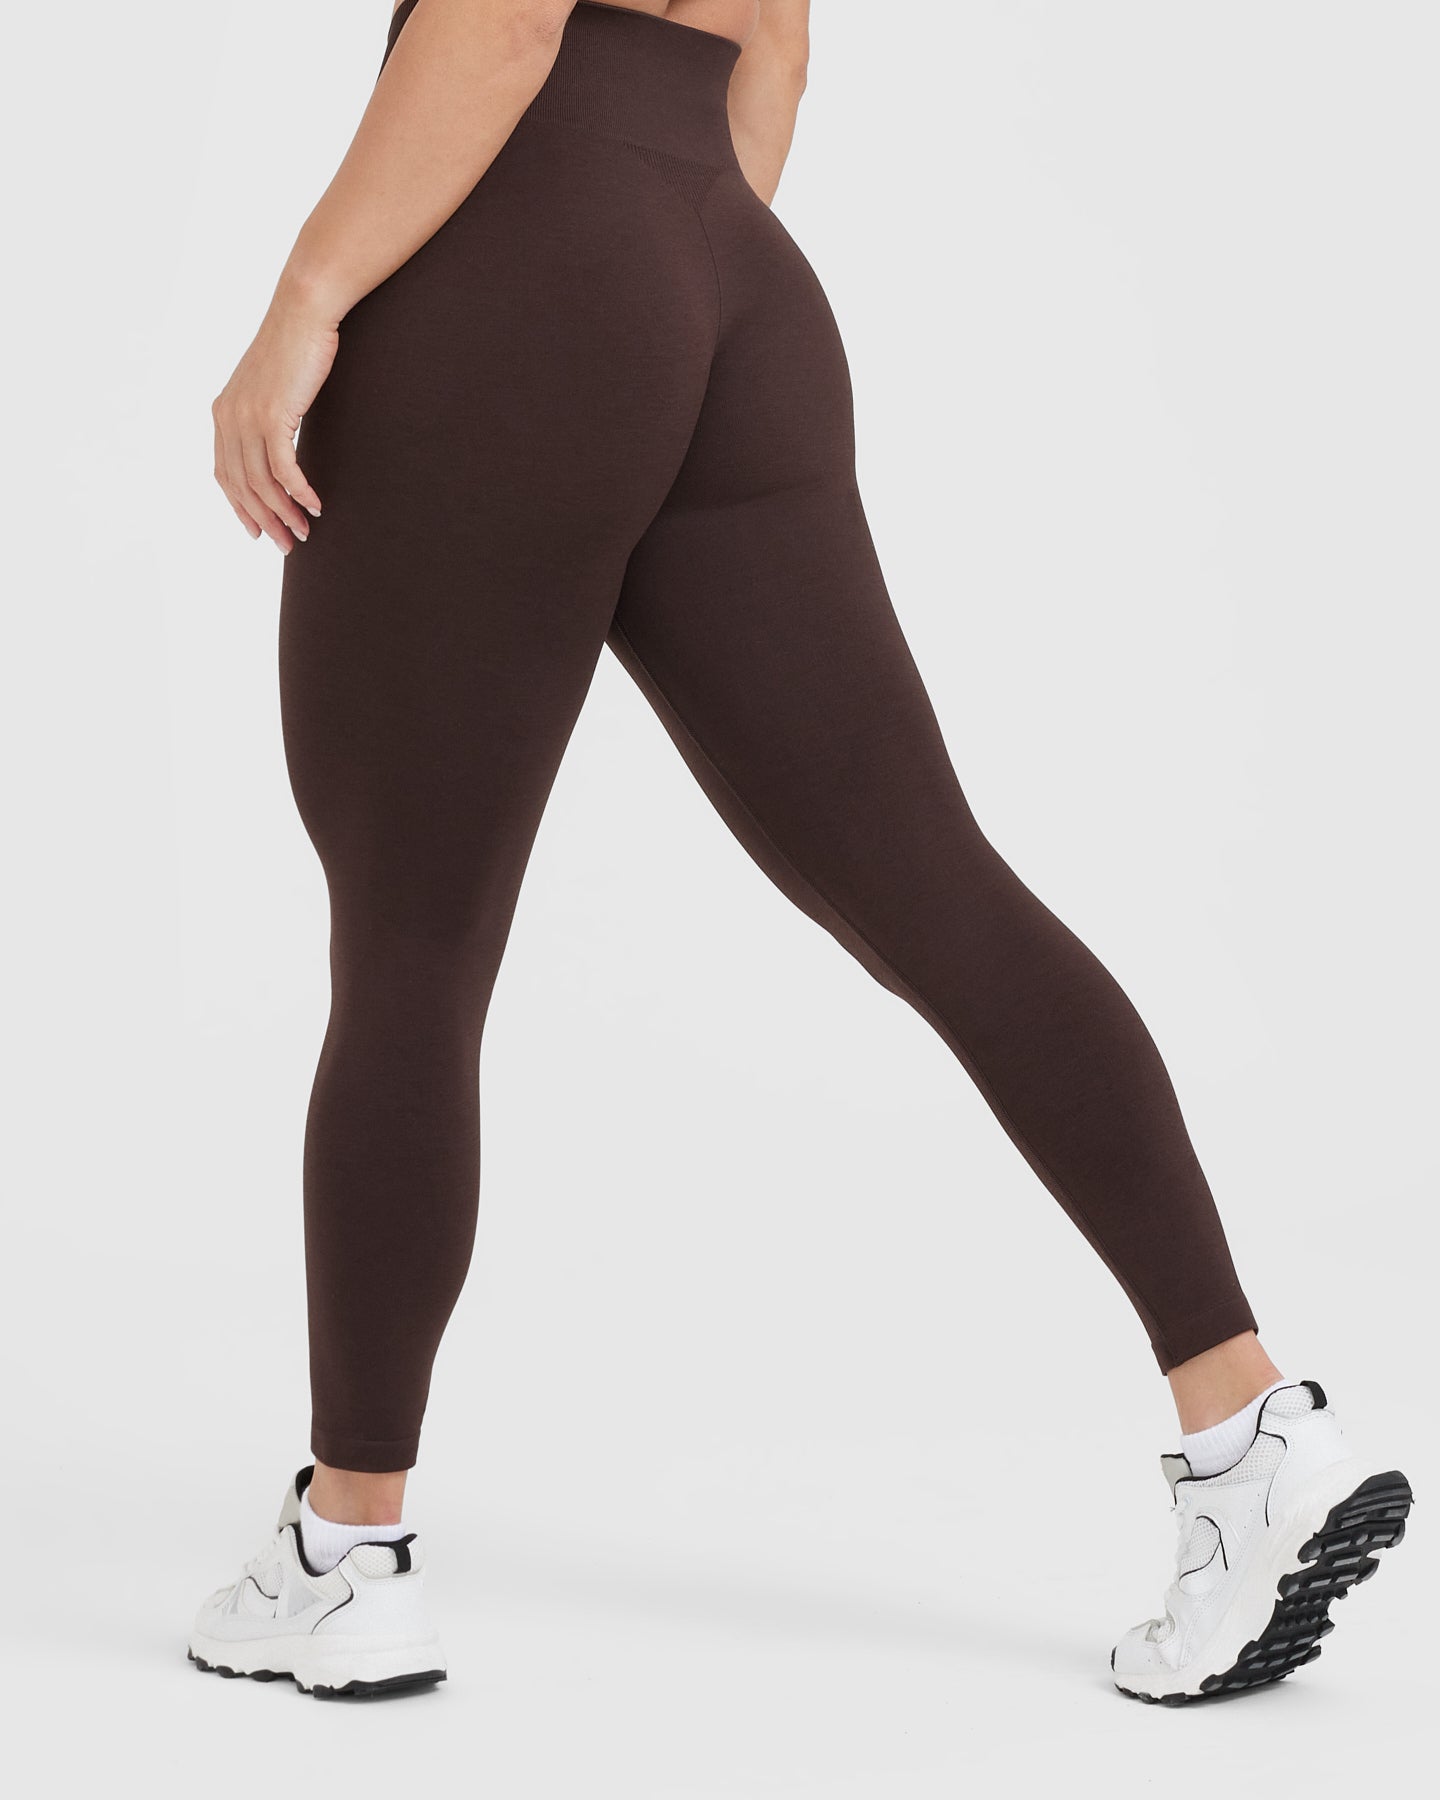 70% Marl Classic Cocoa US Active Leggings Seamless | 2.0 Oner